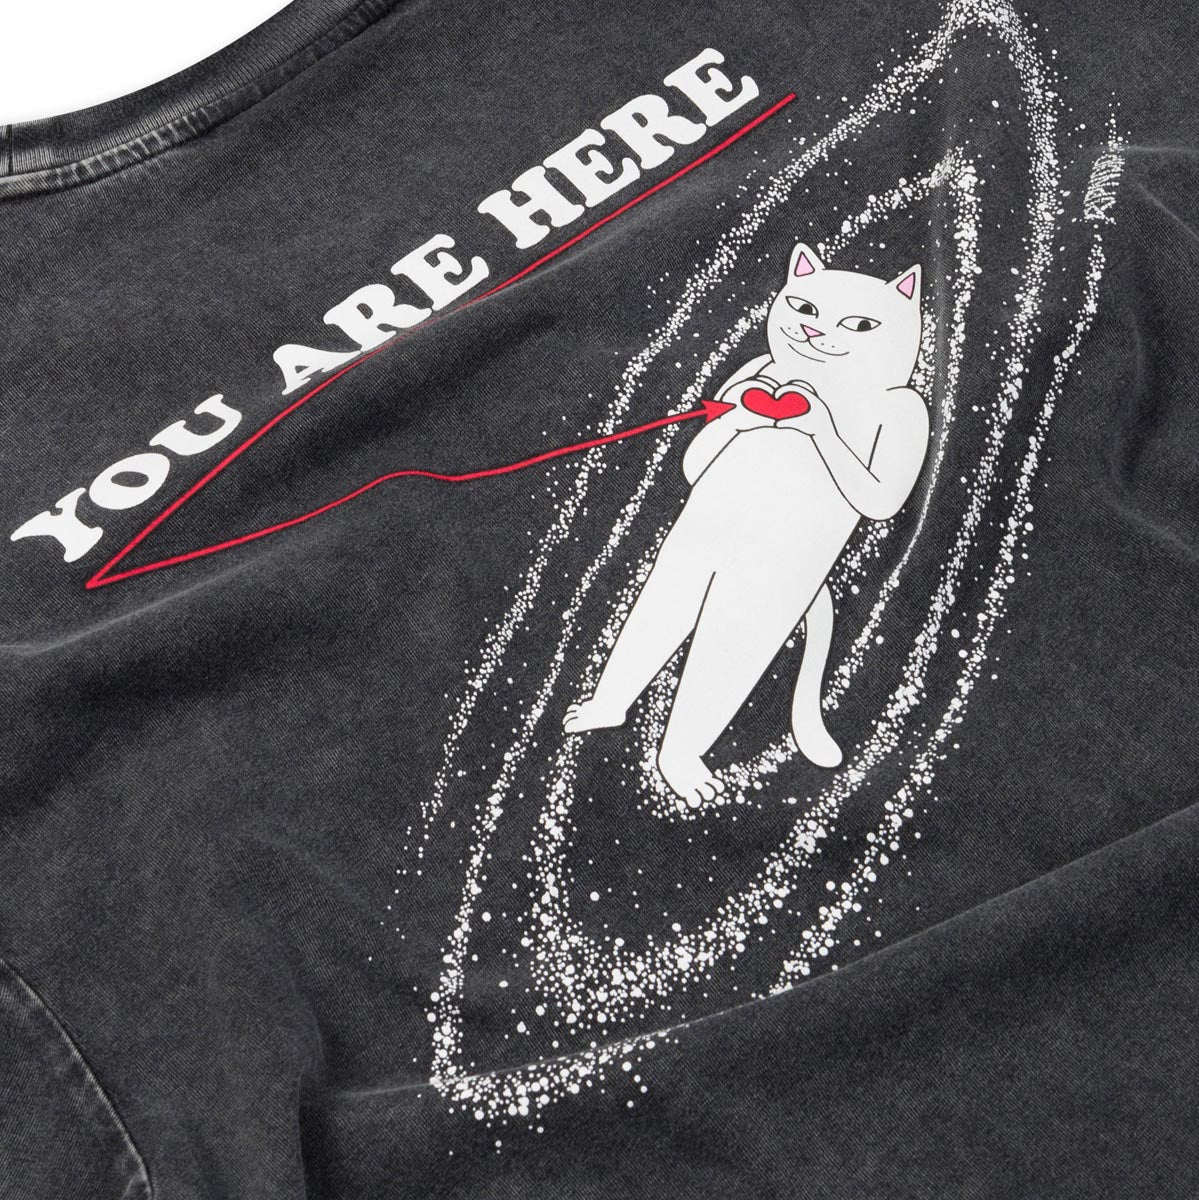 RIPNDIP You Are Here T-Shirt - Black image 4